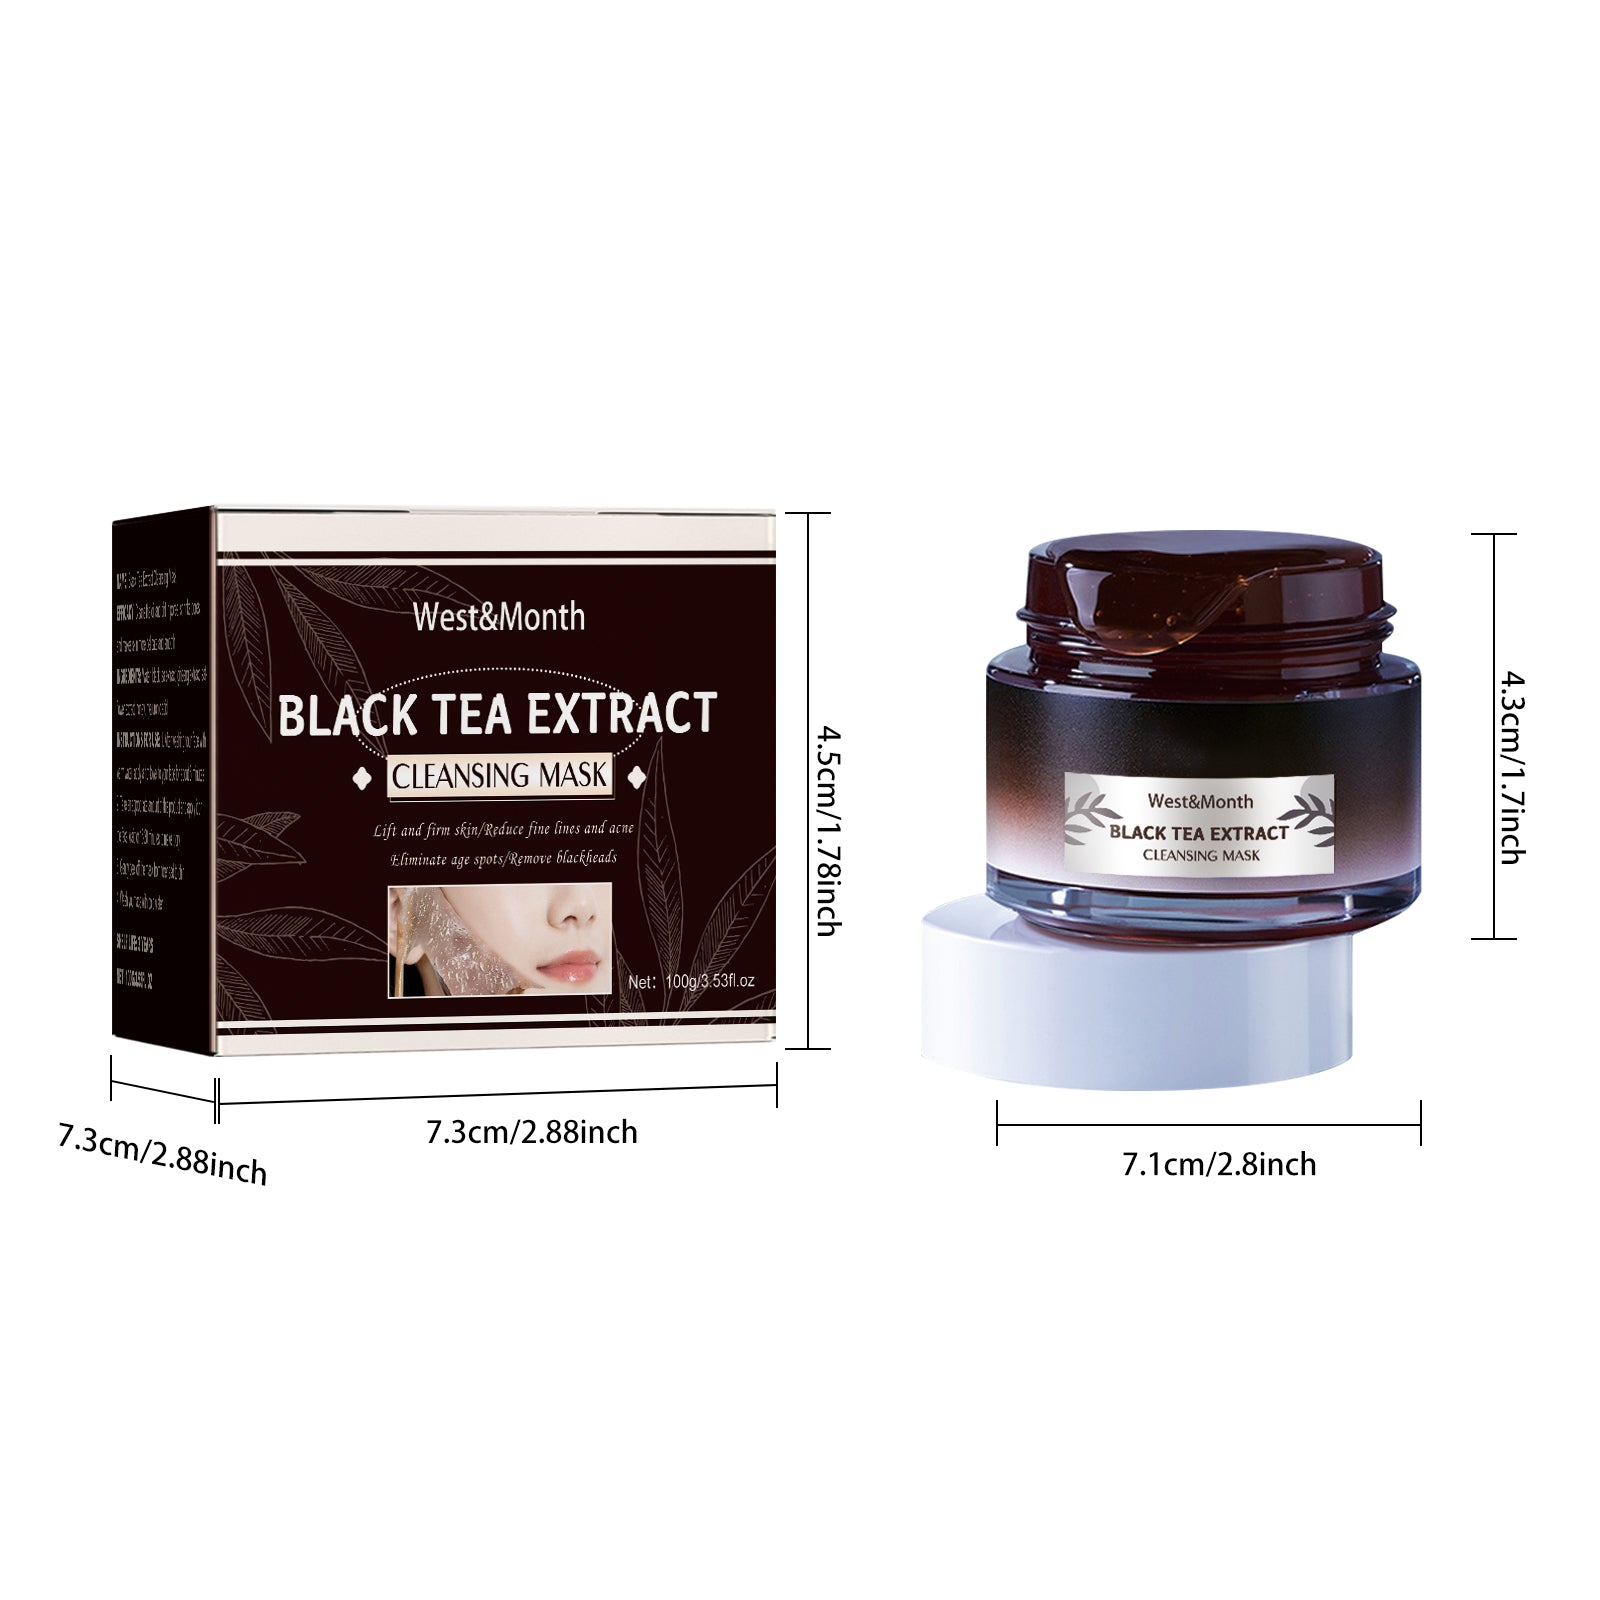 West&Month Black Tea Mask Cleans and refines pores, brightens skin and rejuvenates skin, spreadable mask